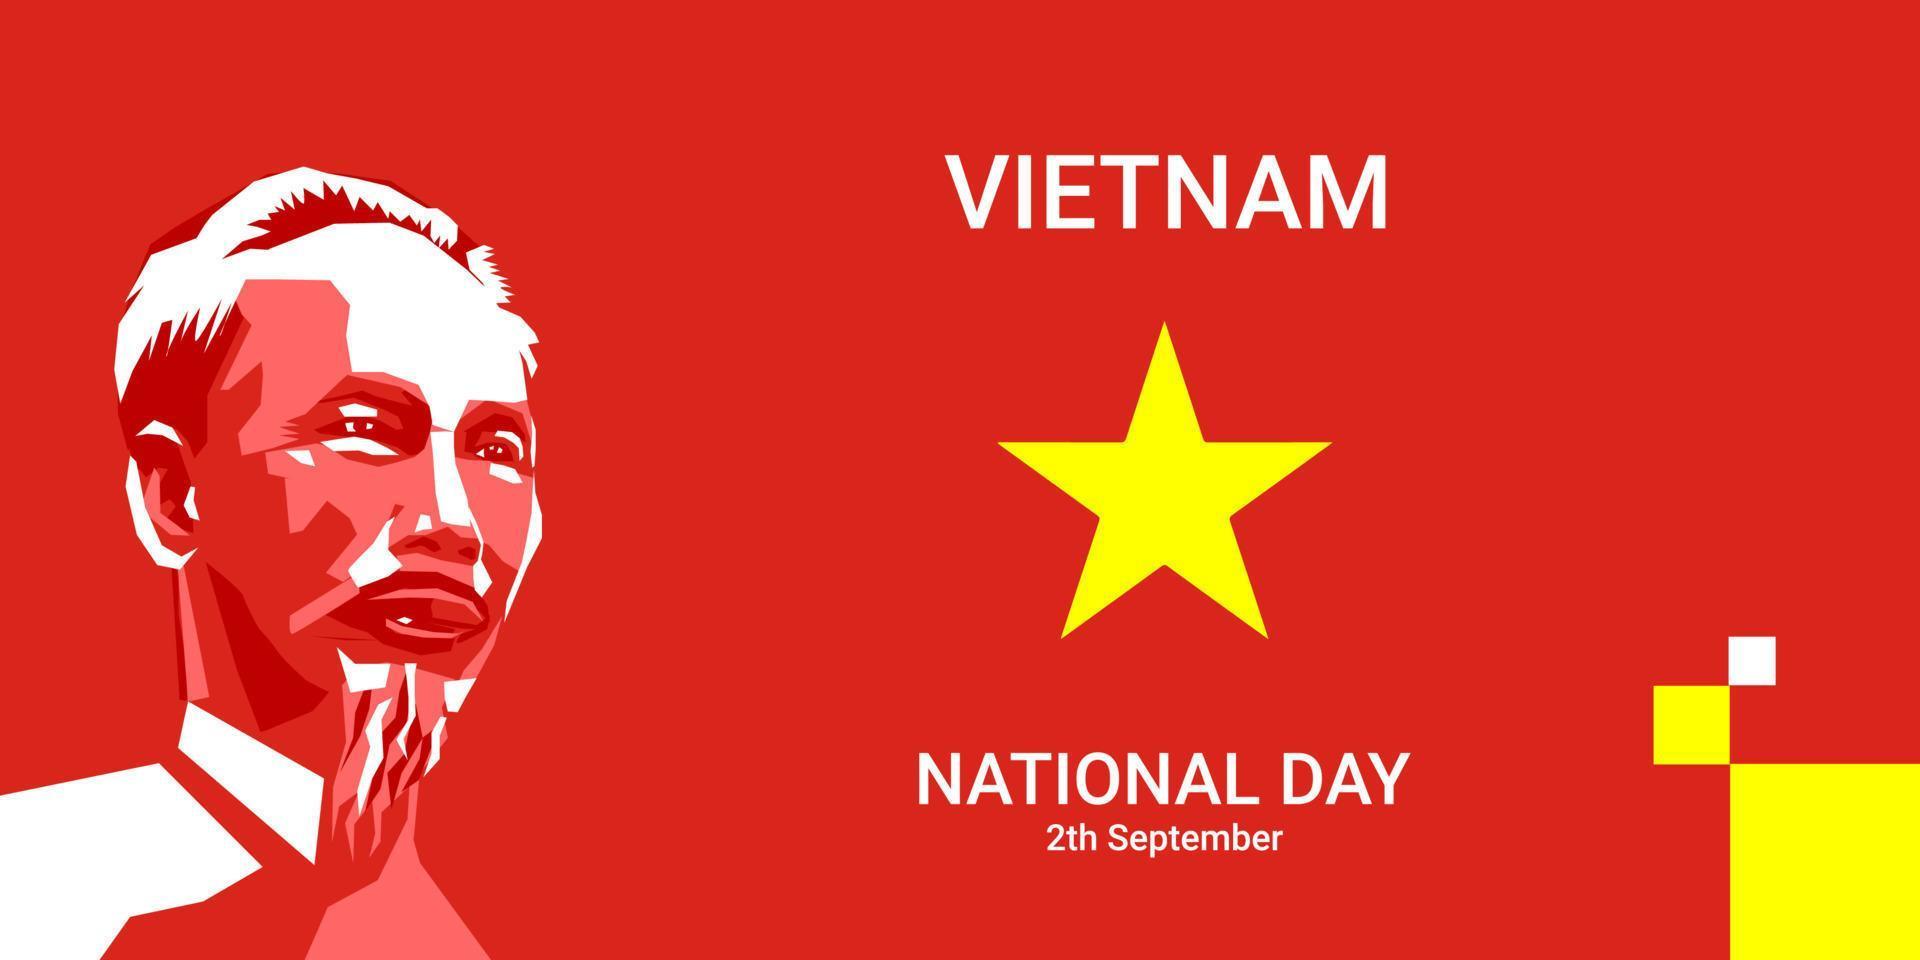 vietnam national day. a poster to celebrate and welcome vietnam independence, with big vietnamese figures vector